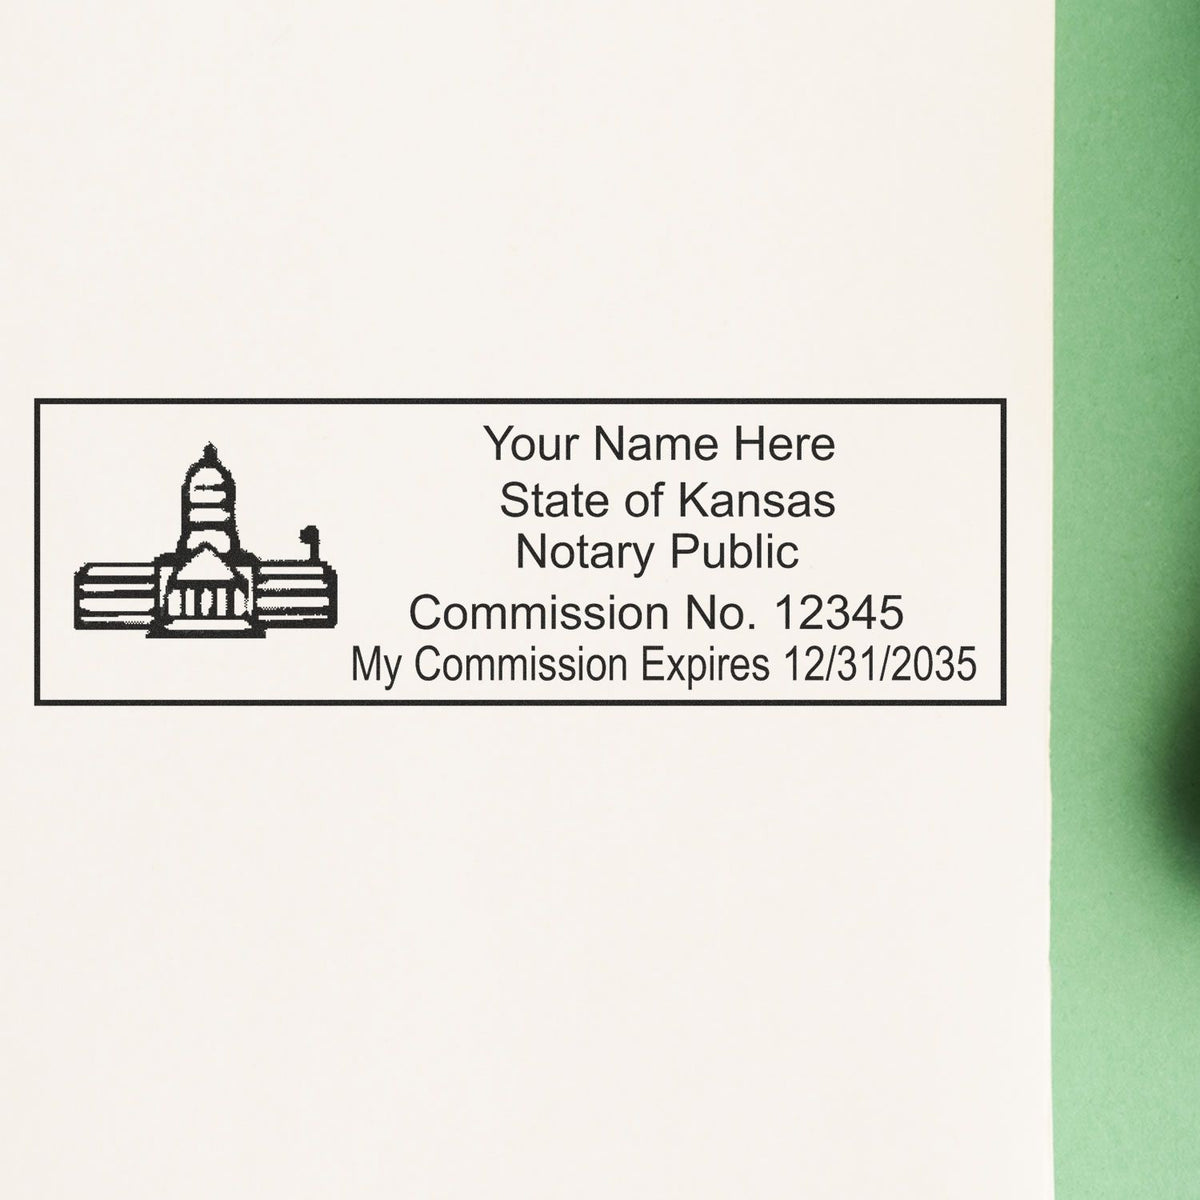 A photograph of the MaxLight Premium Pre-Inked Kansas State Seal Notarial Stamp stamp impression reveals a vivid, professional image of the on paper.